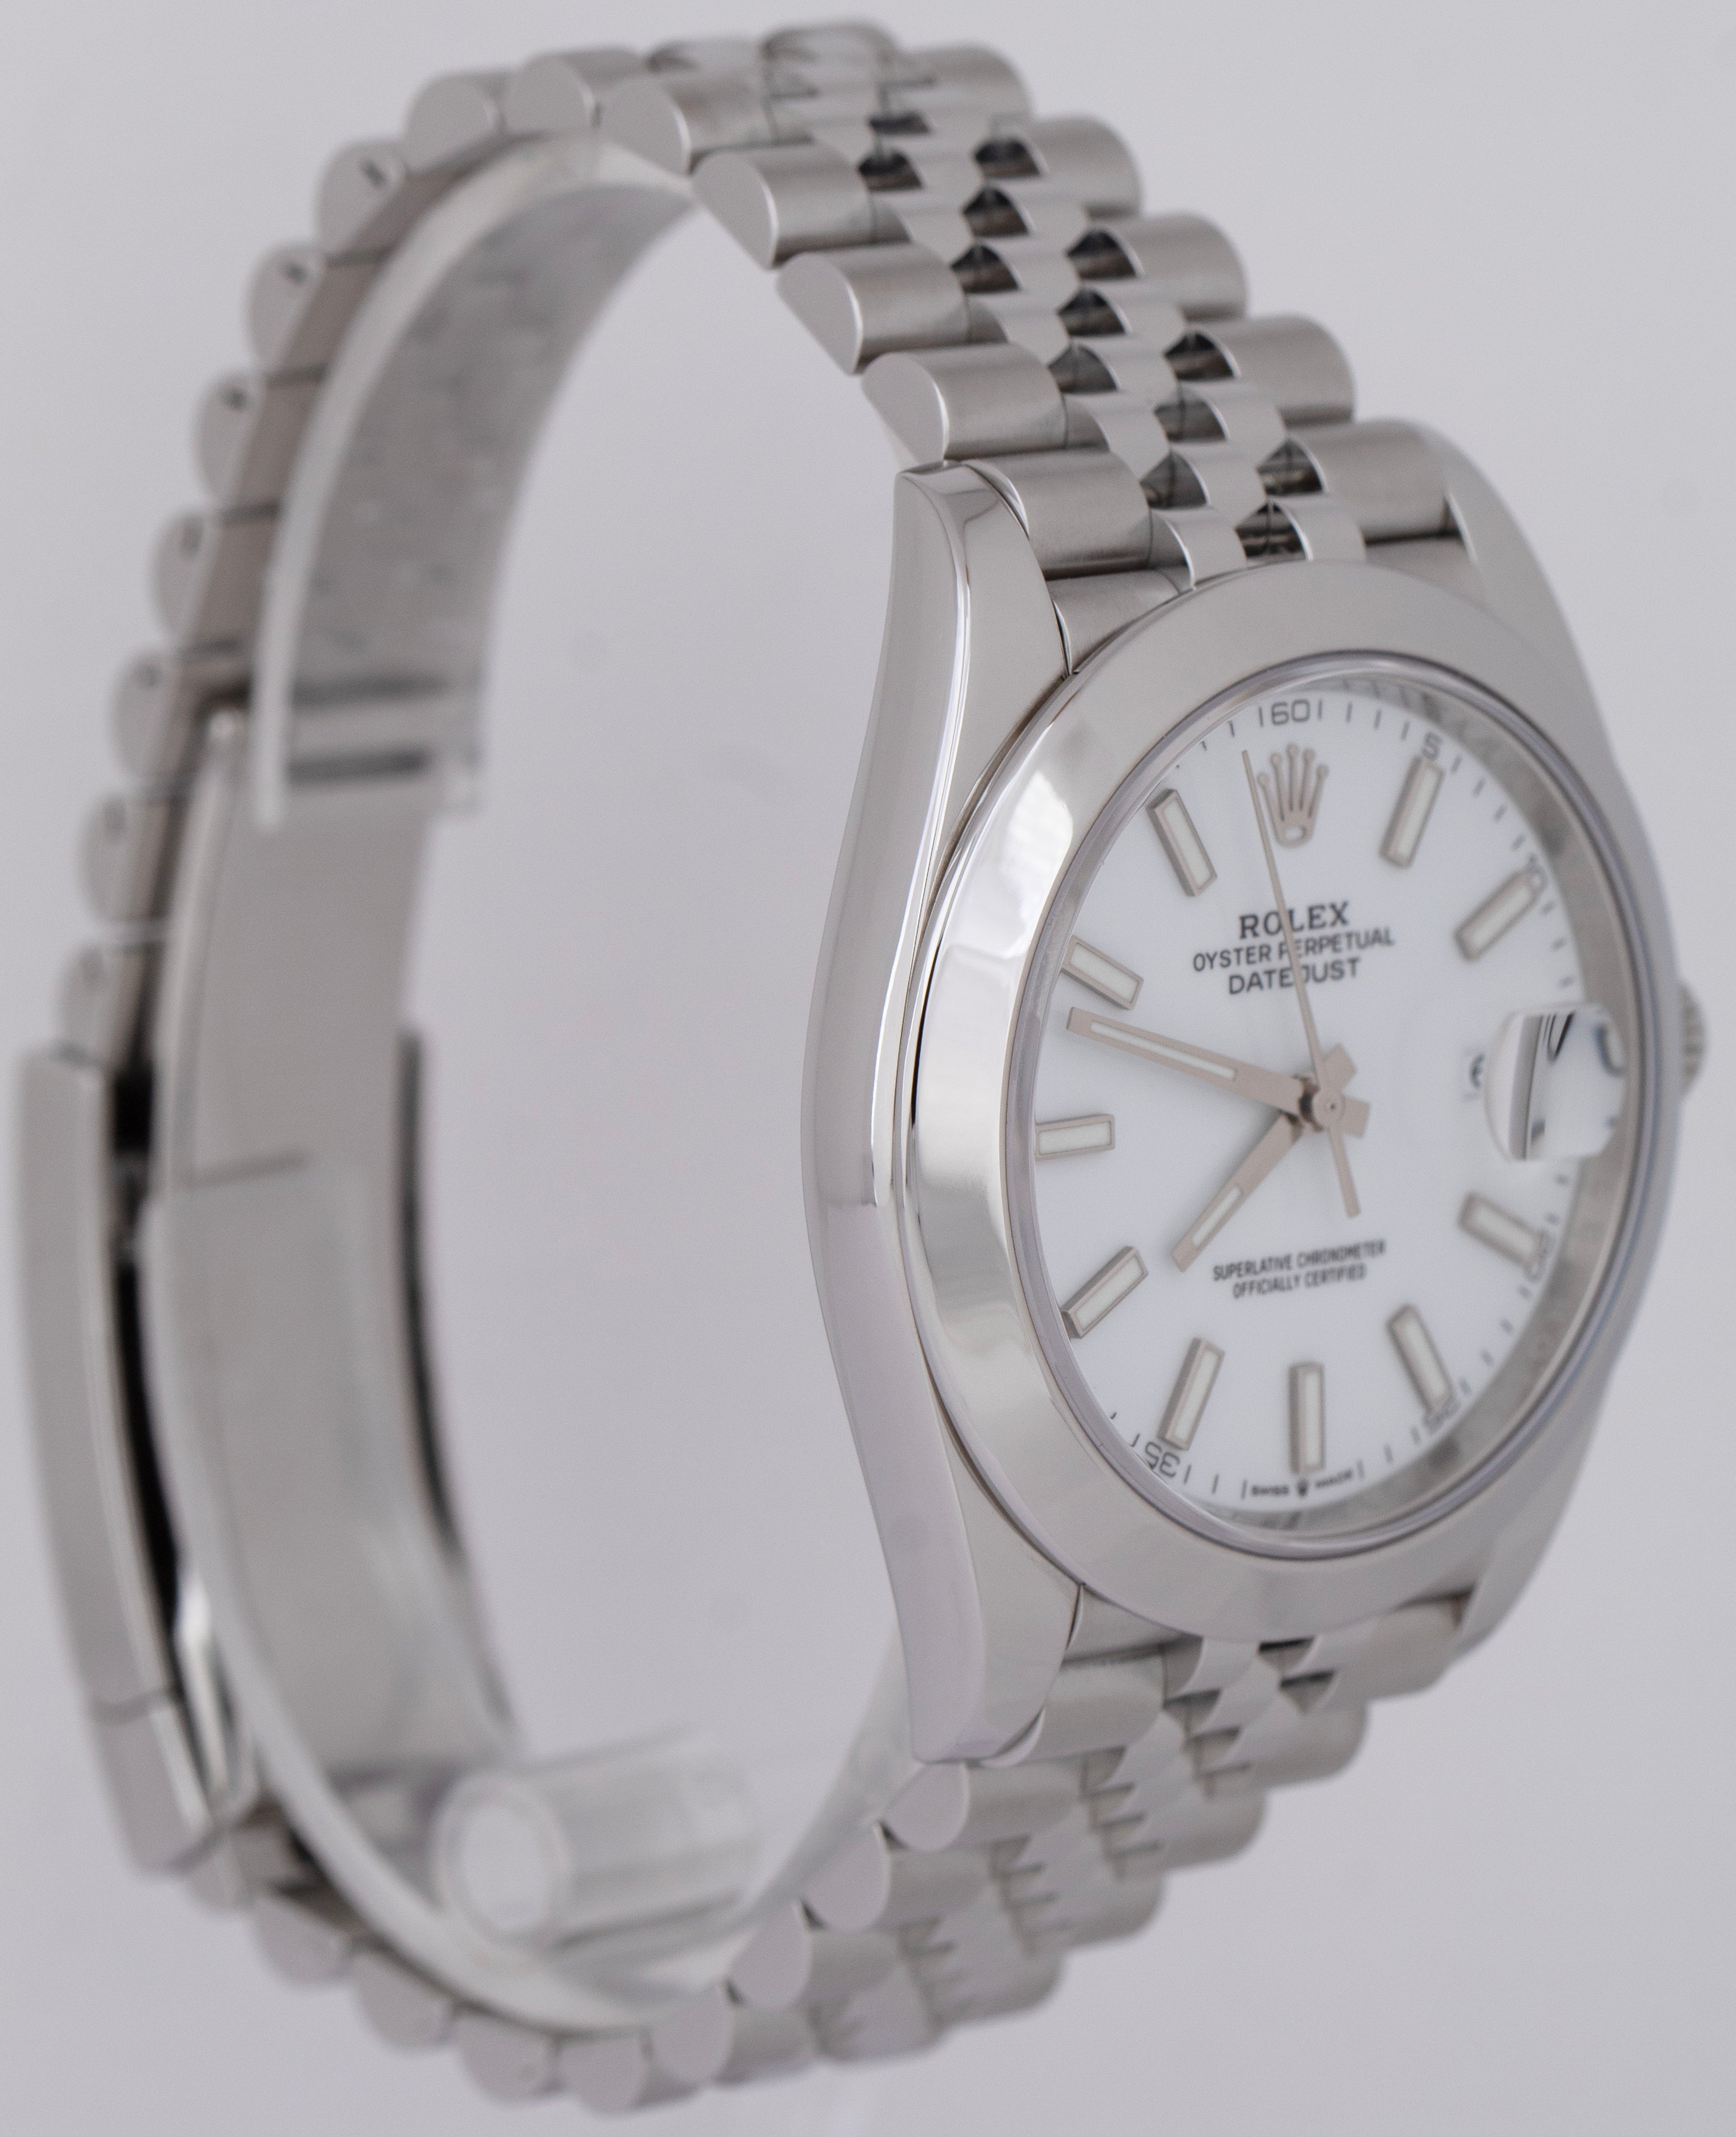 MINT Rolex DateJust 41 White Stainless Steel 41mm Automatic JUBILEE Watch 126300